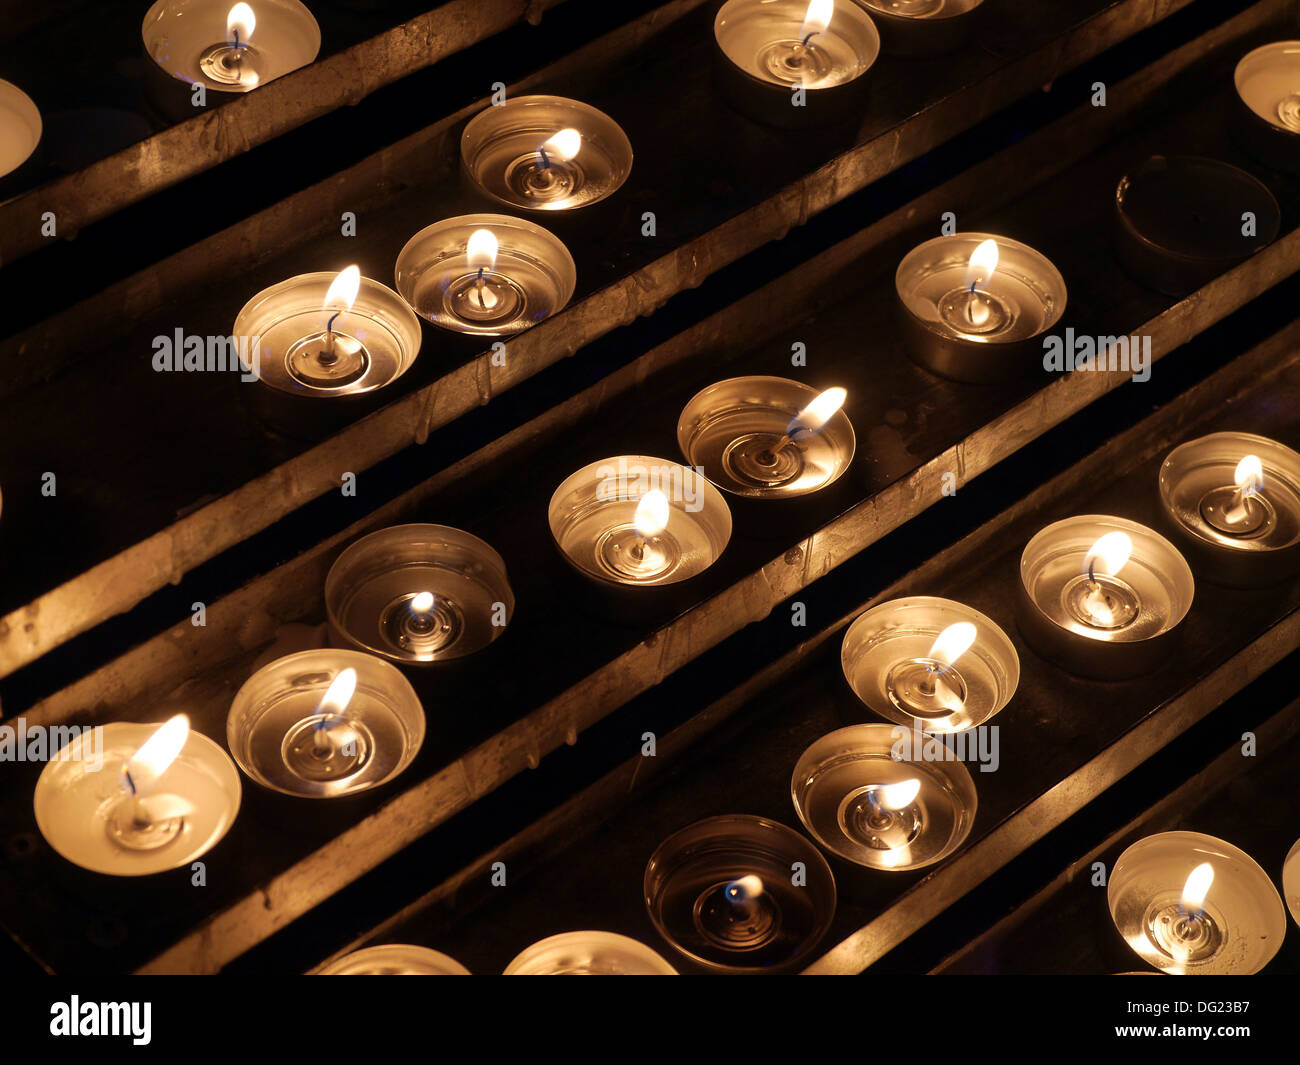 Rows of lit votive candles Stock Photo